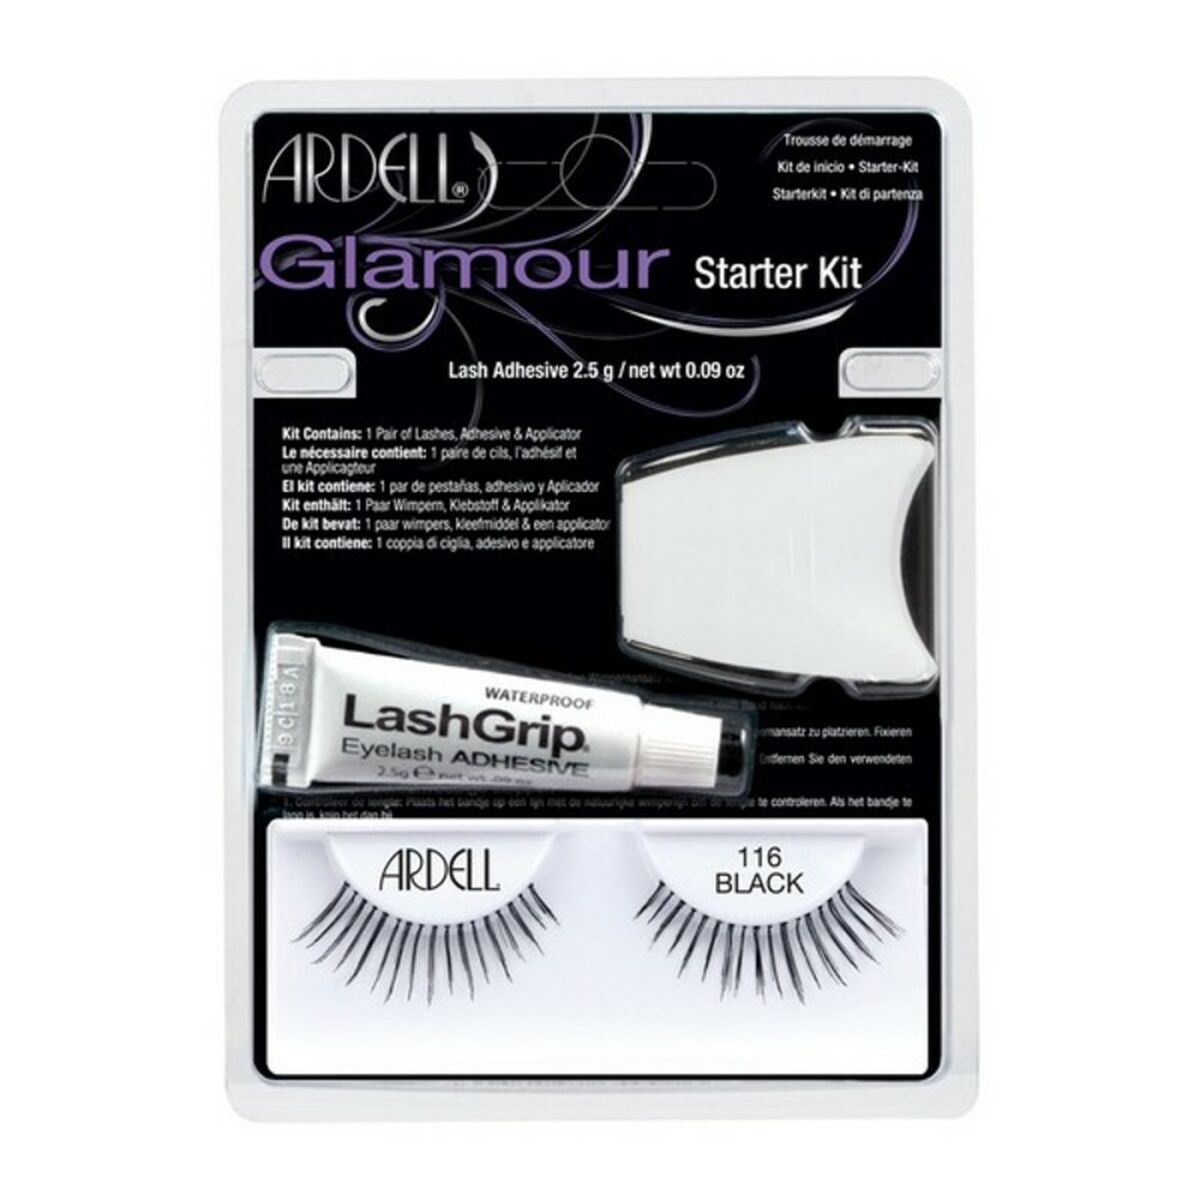 Faux cils Glamour Ardell (3 pcs)